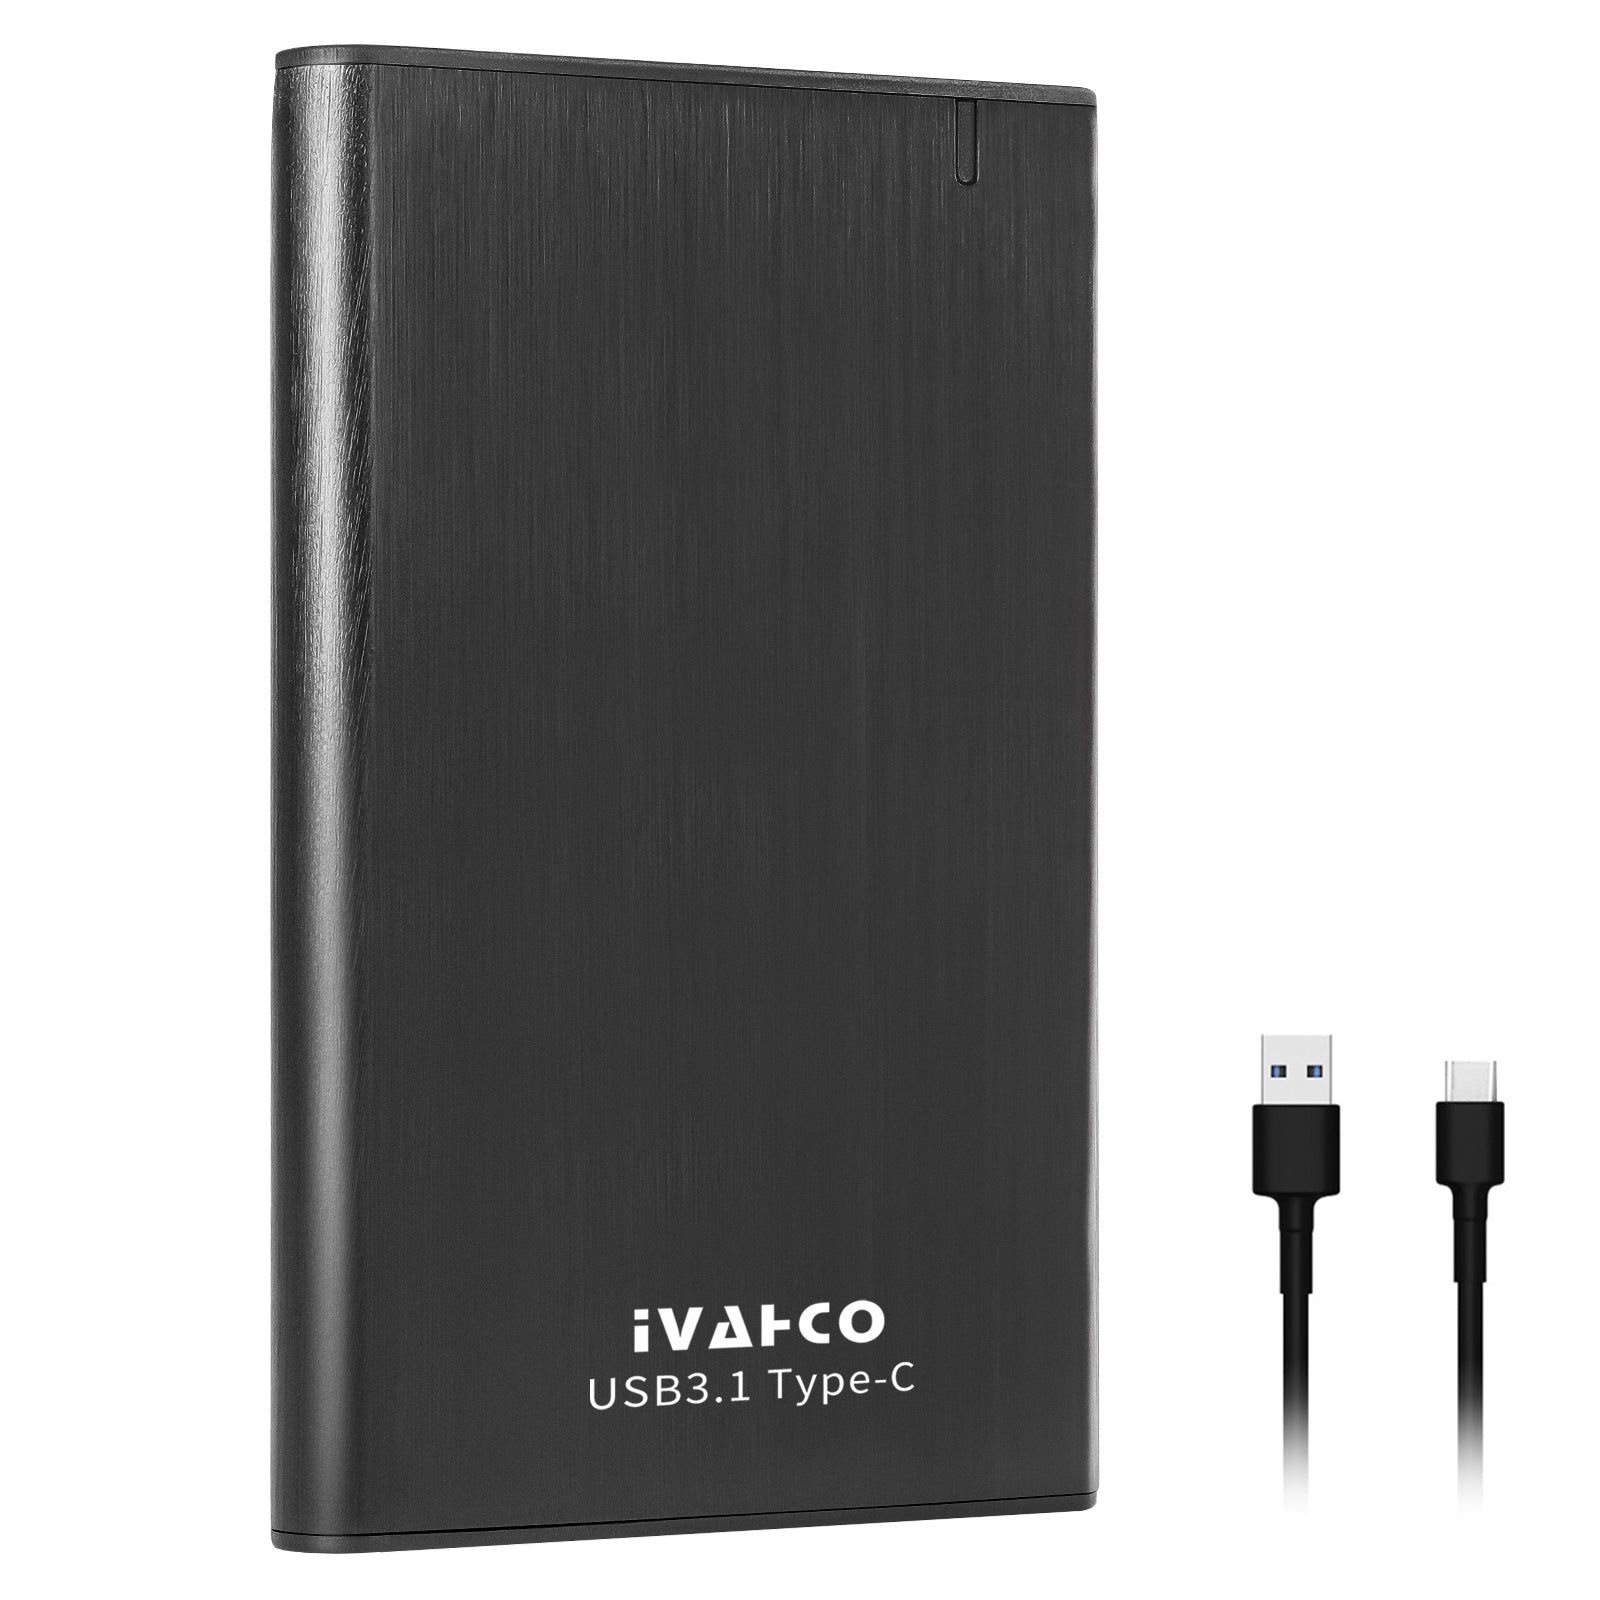 IVAHCO 500GB Type-C USB3.1 2.5" HDD External Case Brushed Metal Solid State Drive Enclosure with Indicator - Black